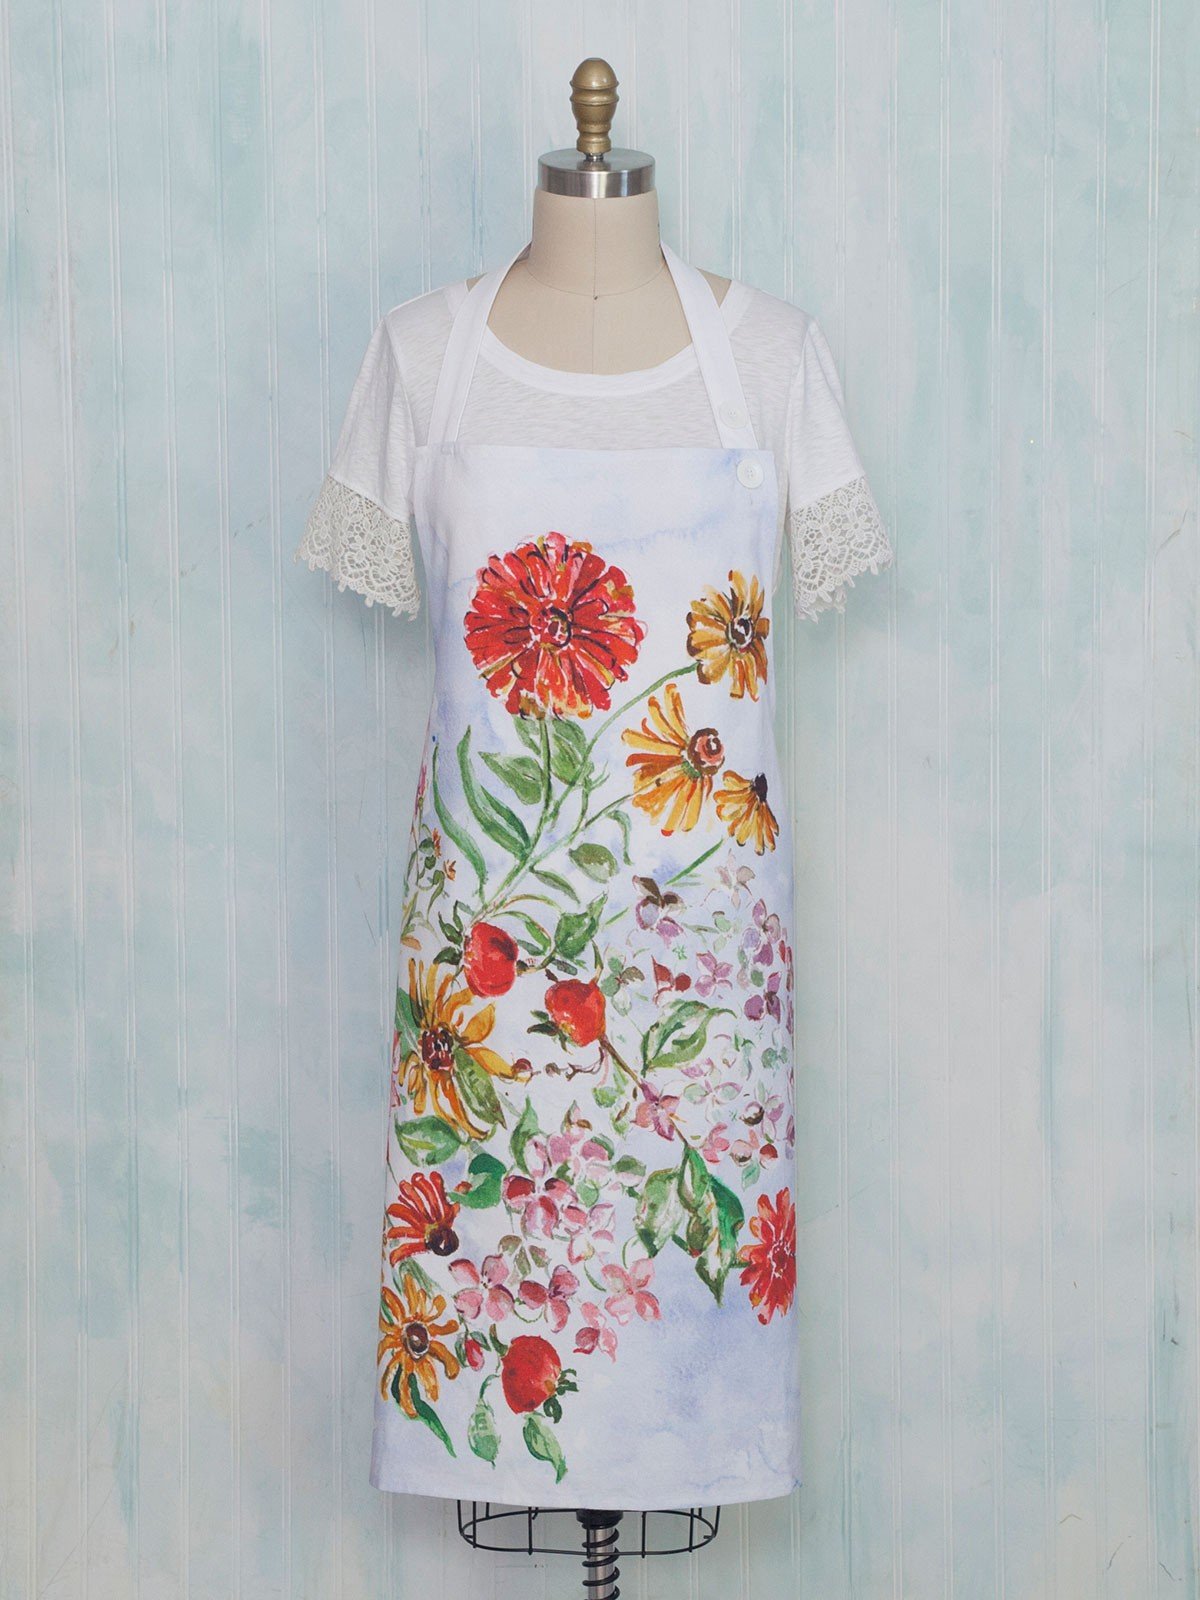 Apple Butter Apron in Multi | April Cornell- SOLD OUT